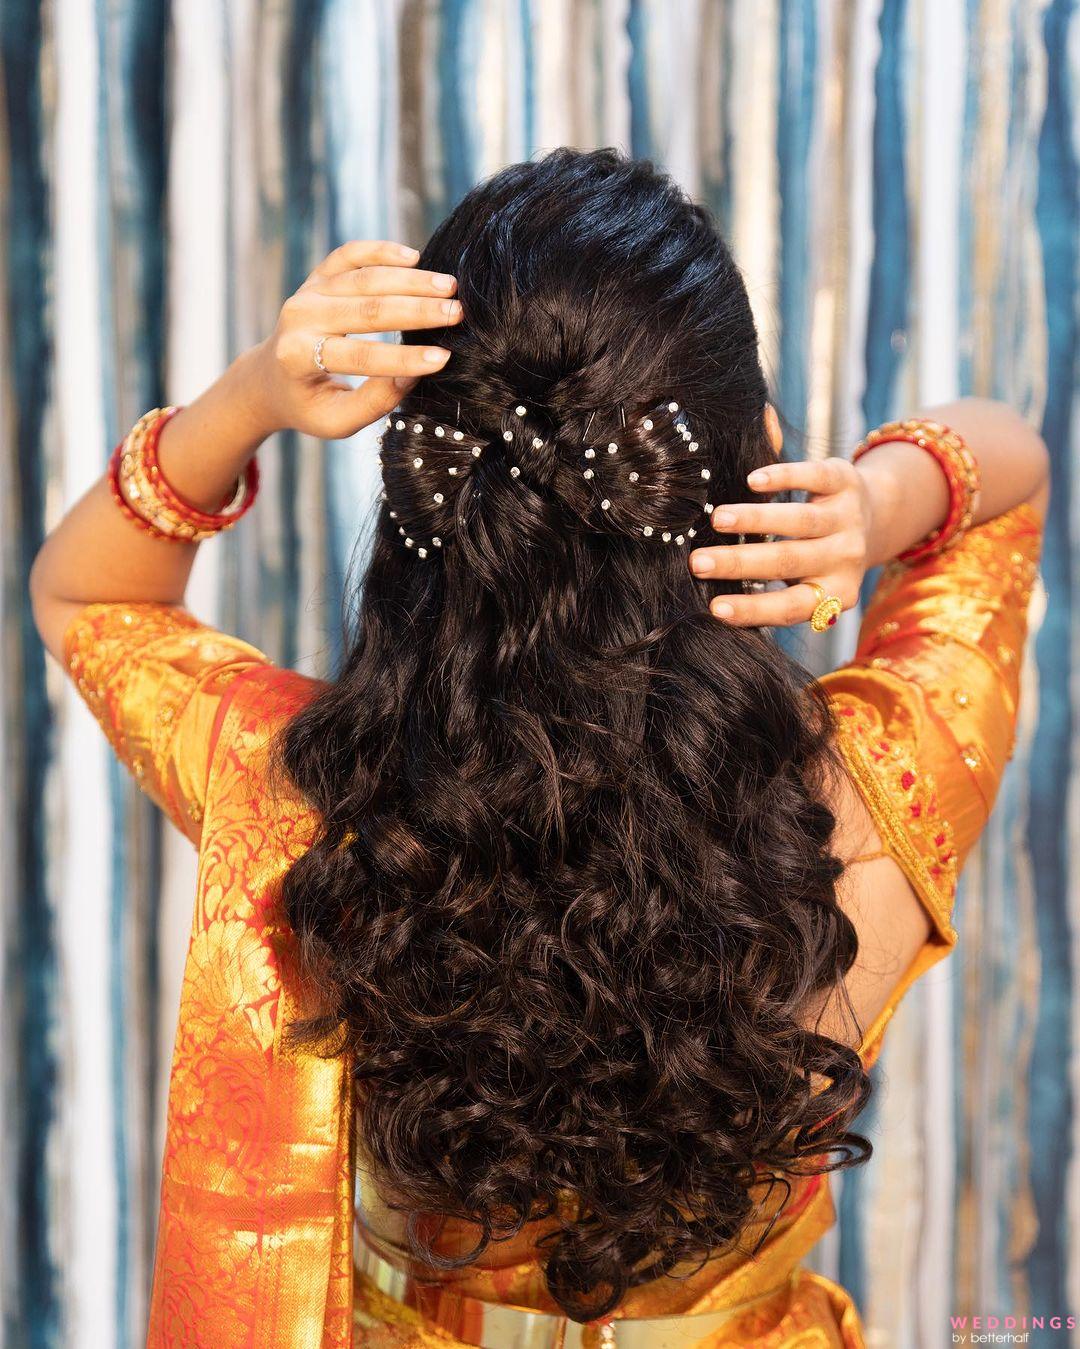 8 Viral Hairstyles for Curly Hair Brides - Weva Photography